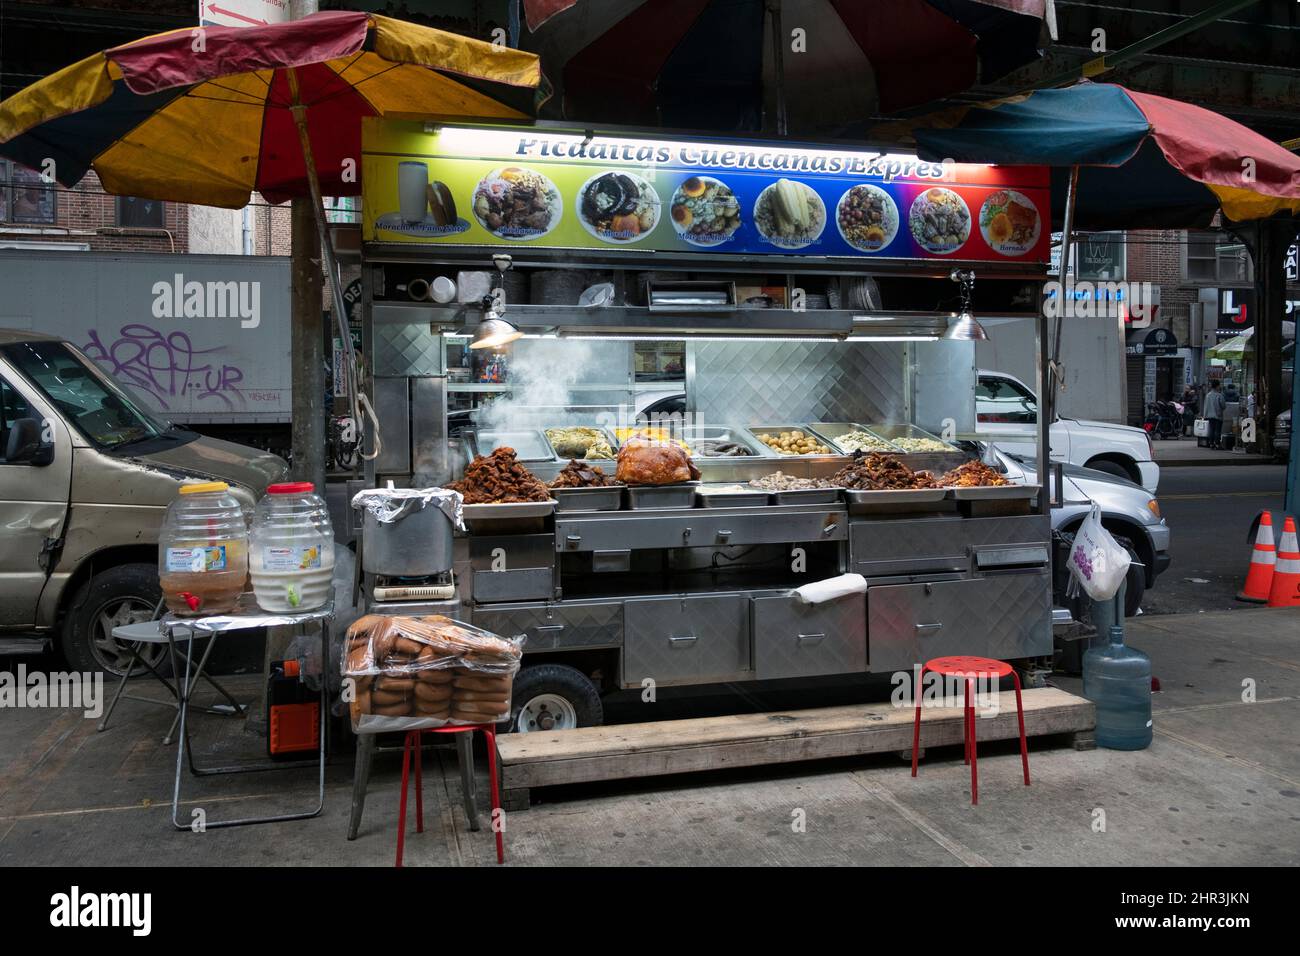 URBAN LANDSCAPE. A food stand selling Mexican Picaditas and other fast foods. Under the el train on Roosevelt avenue in Corona, Queens, New York. Stock Photo